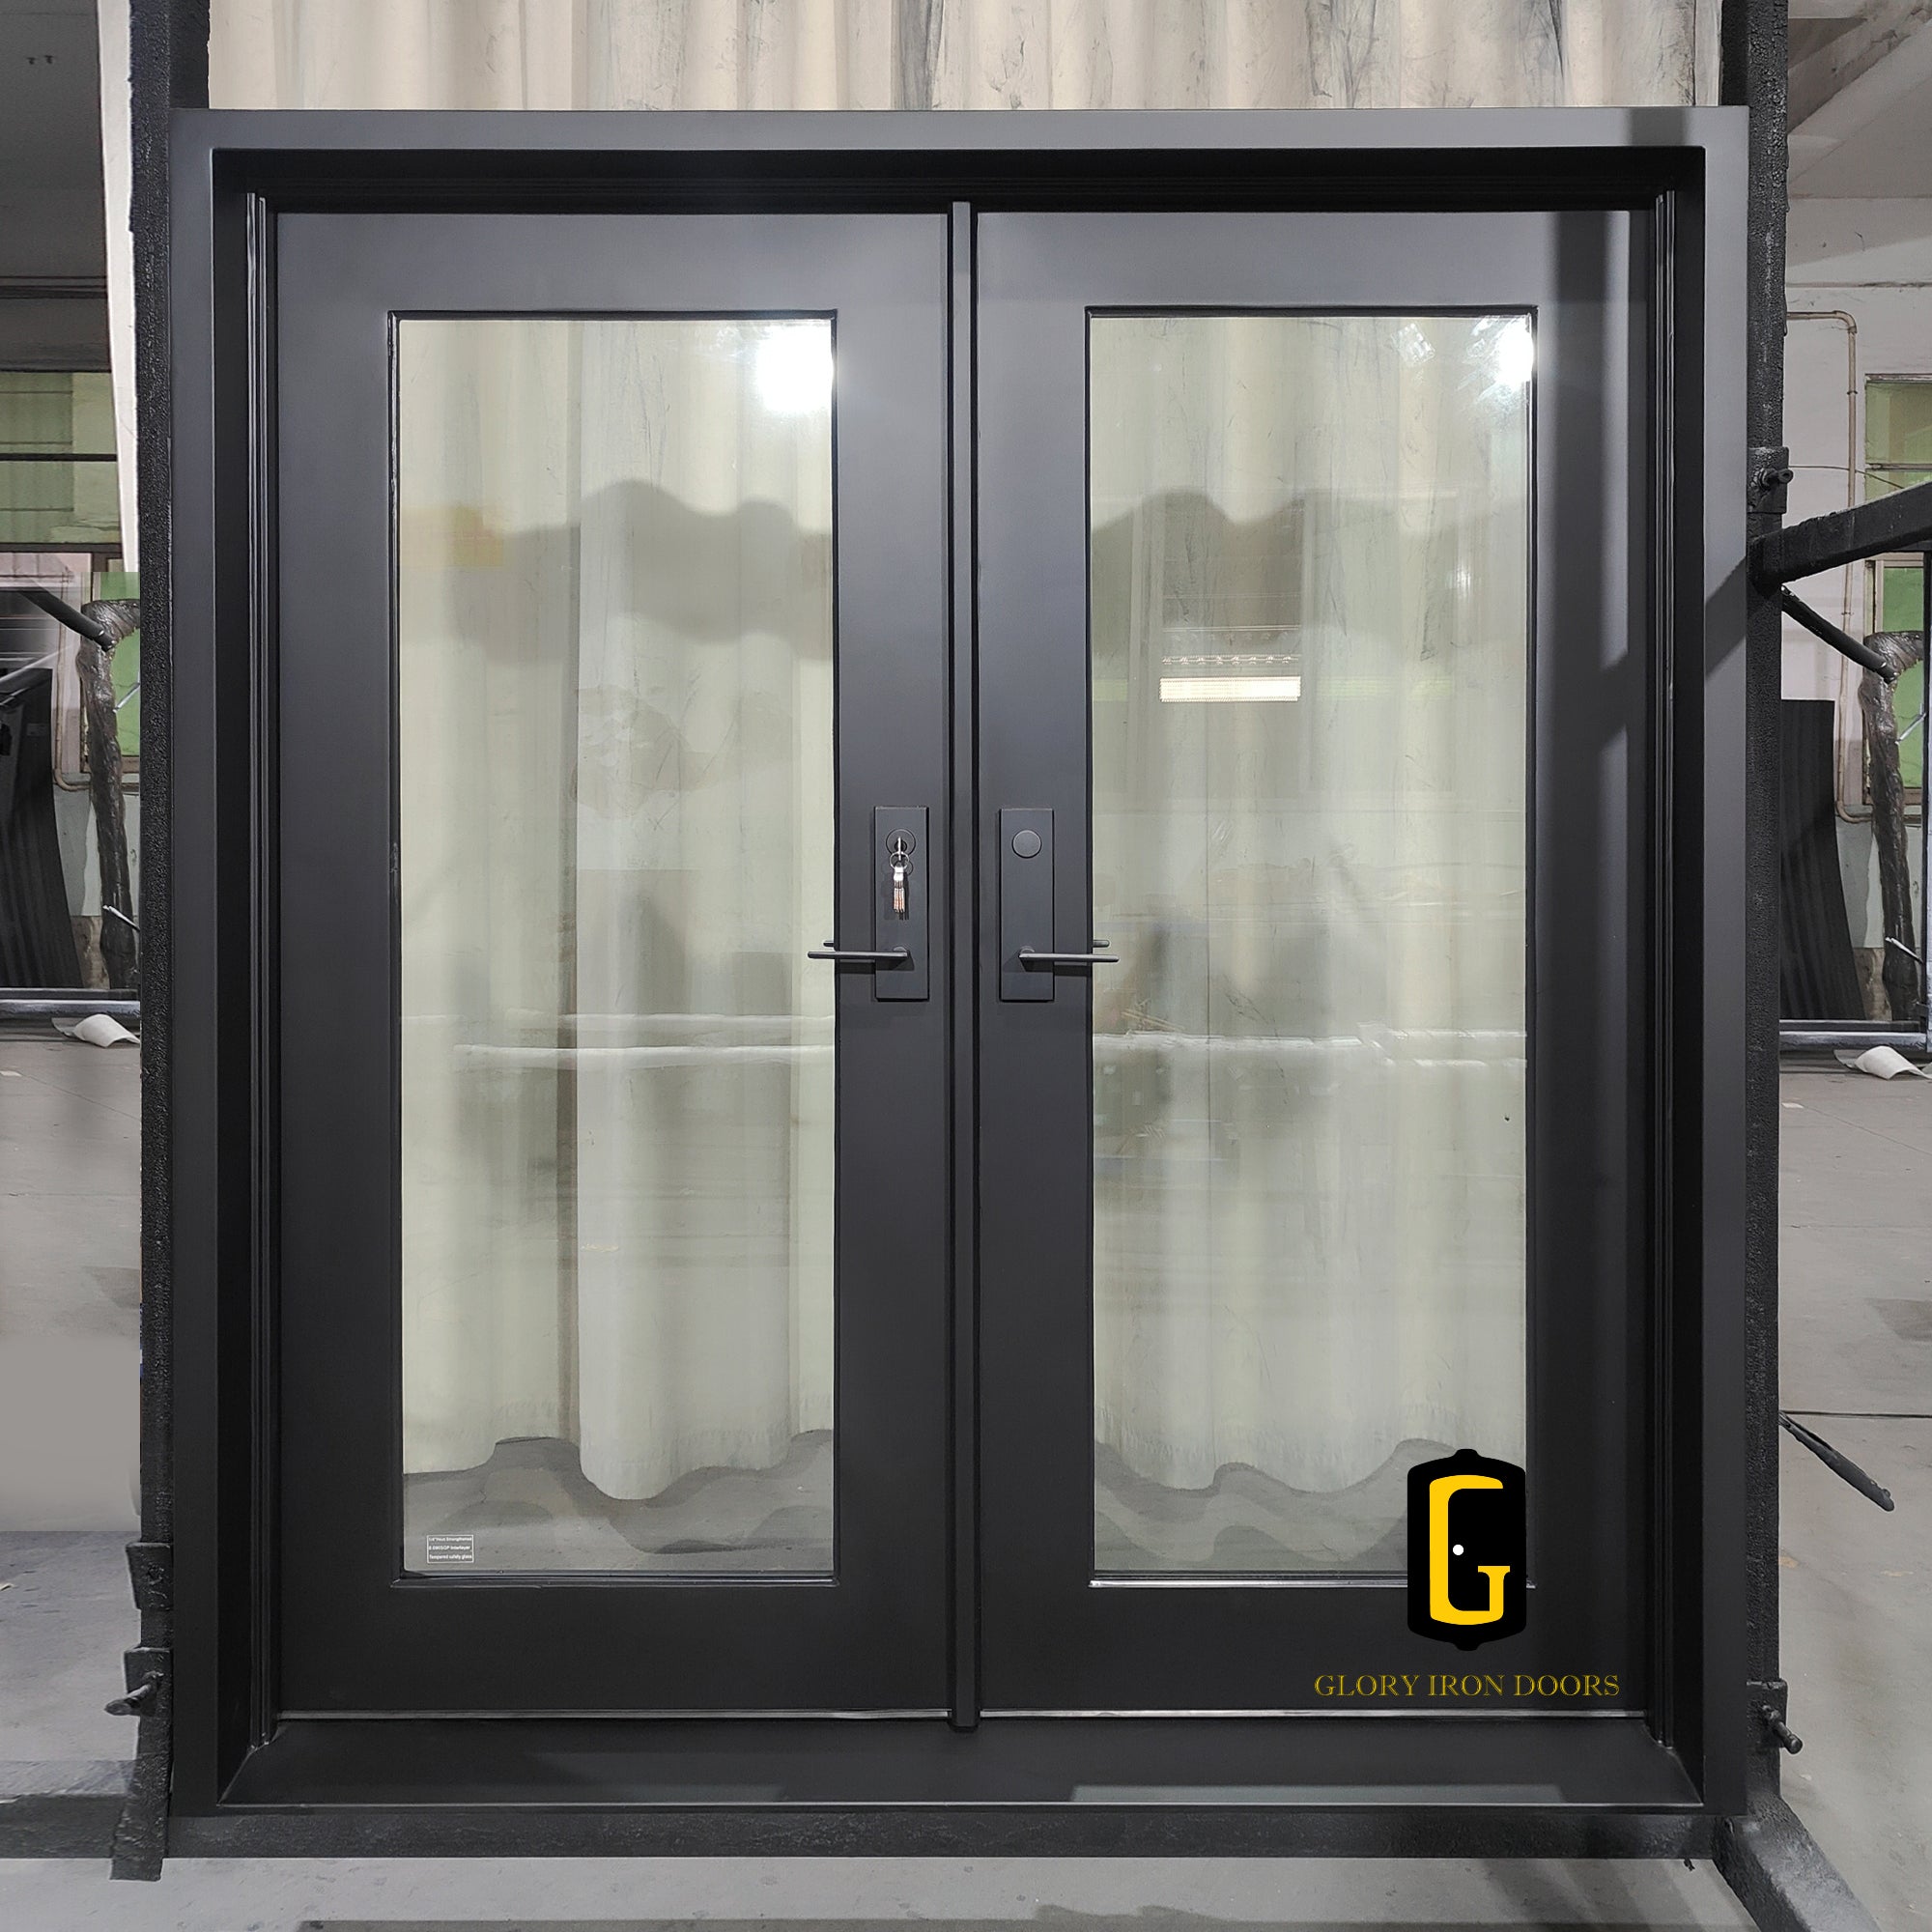 Gloryirondoors large size thermal break double door with clear glass